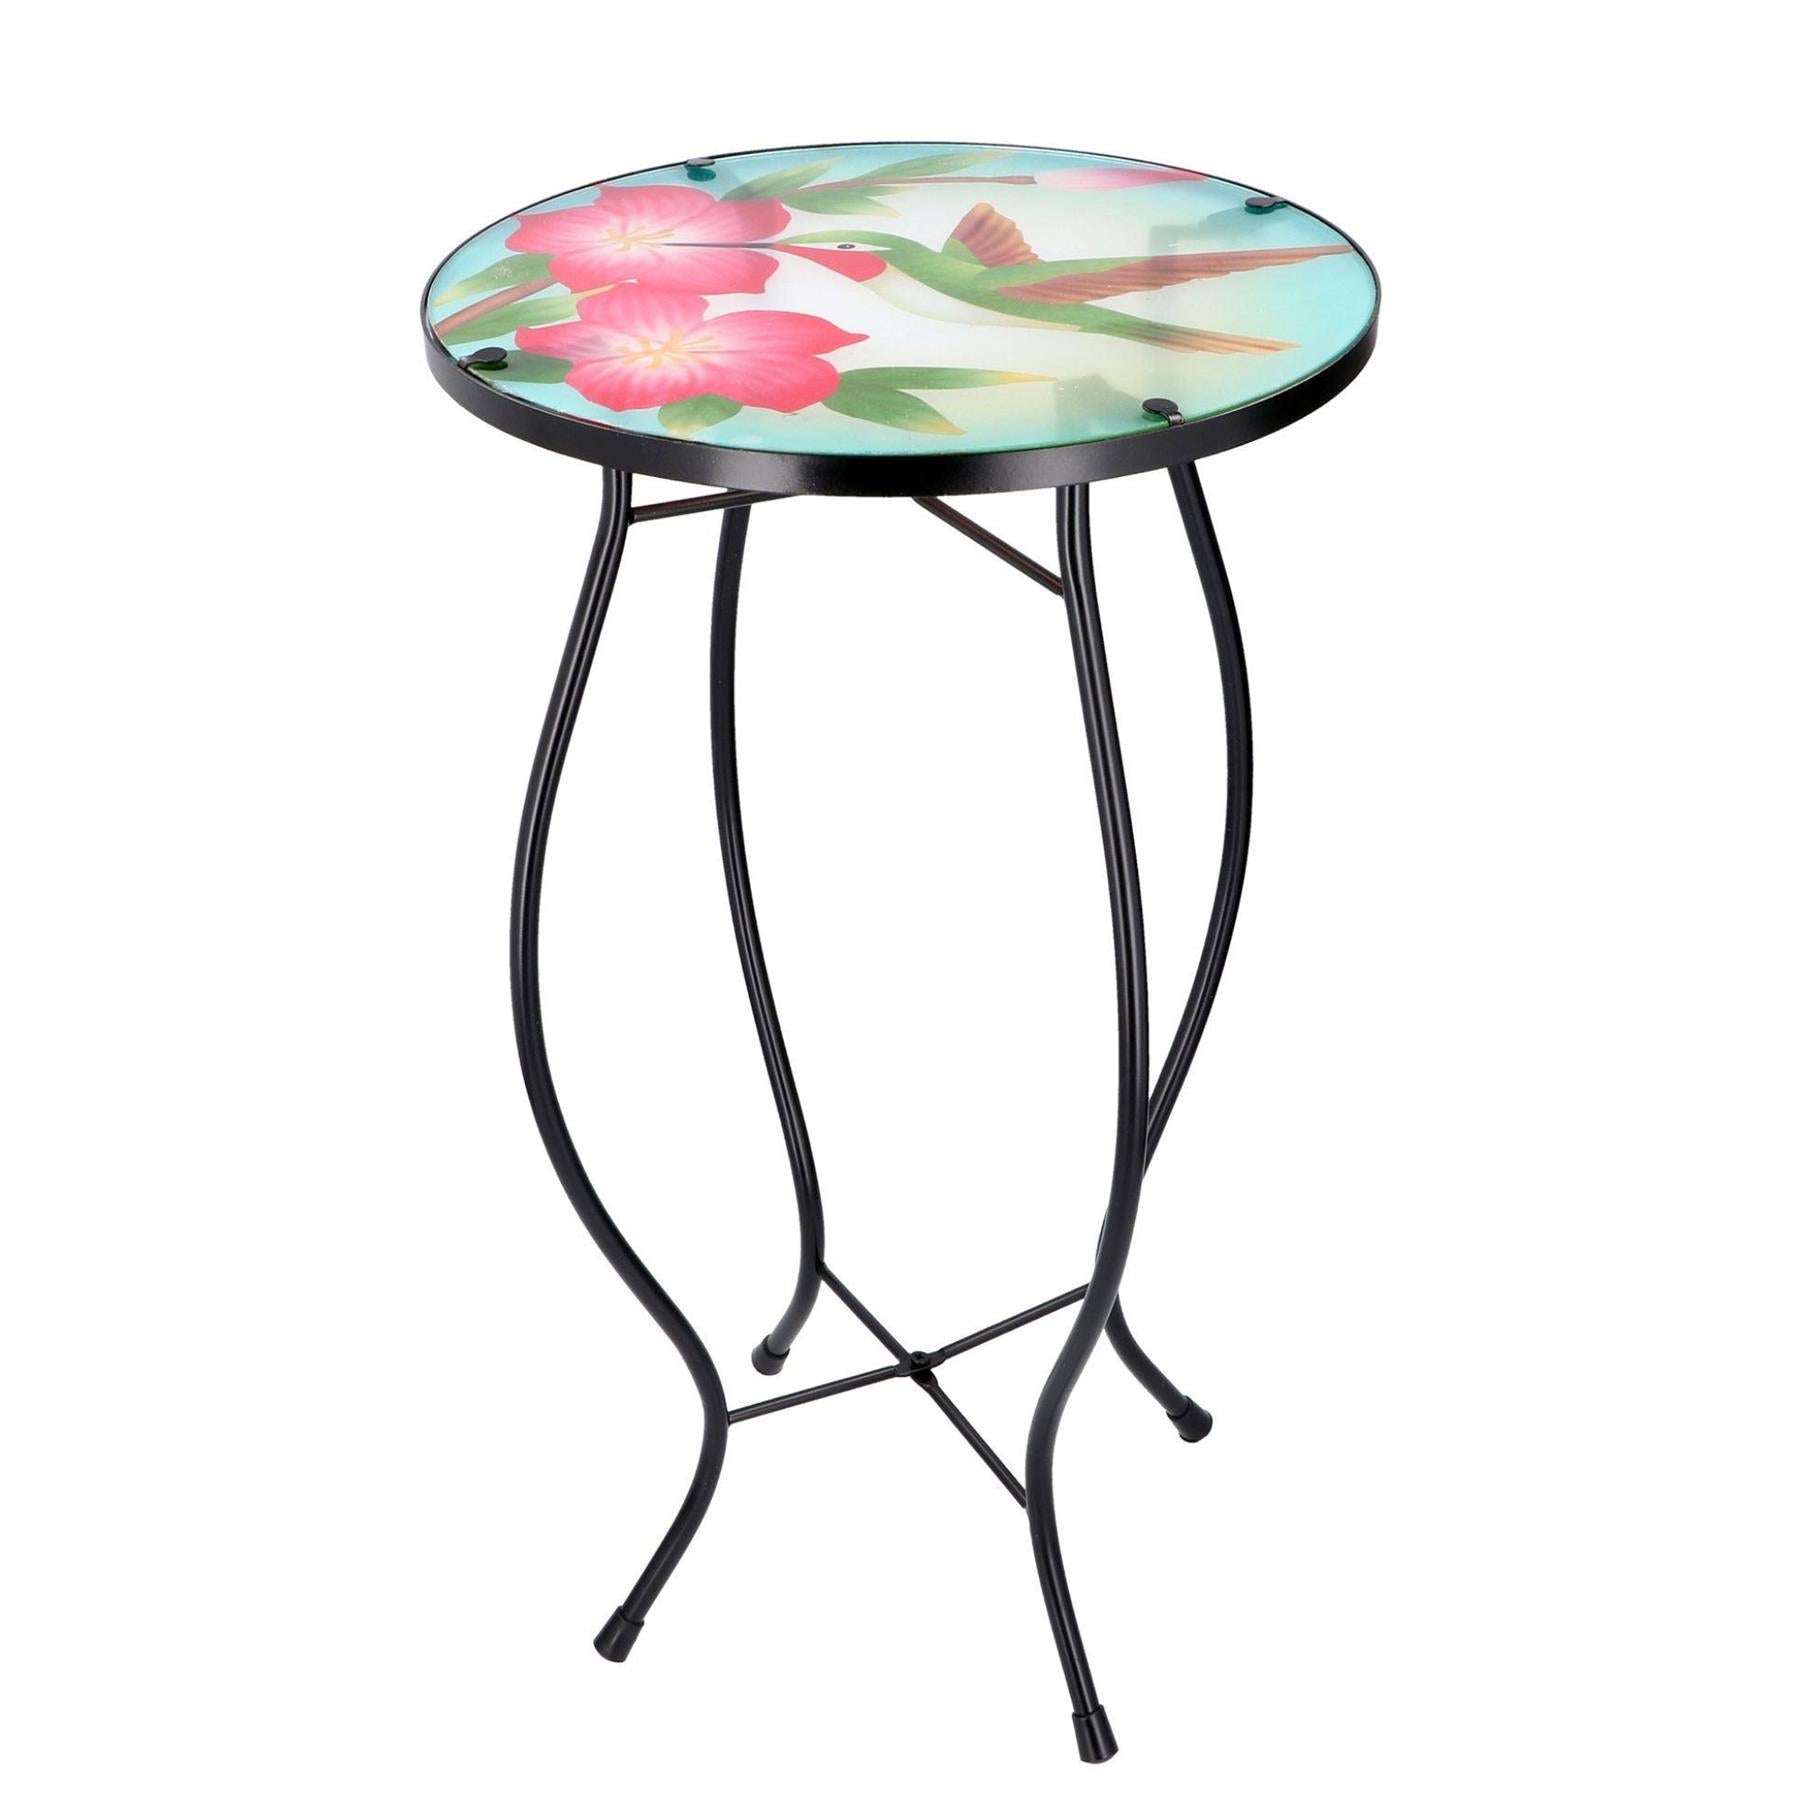 GEEZY table Round Side Garden Mosaic Table With Colibri Design